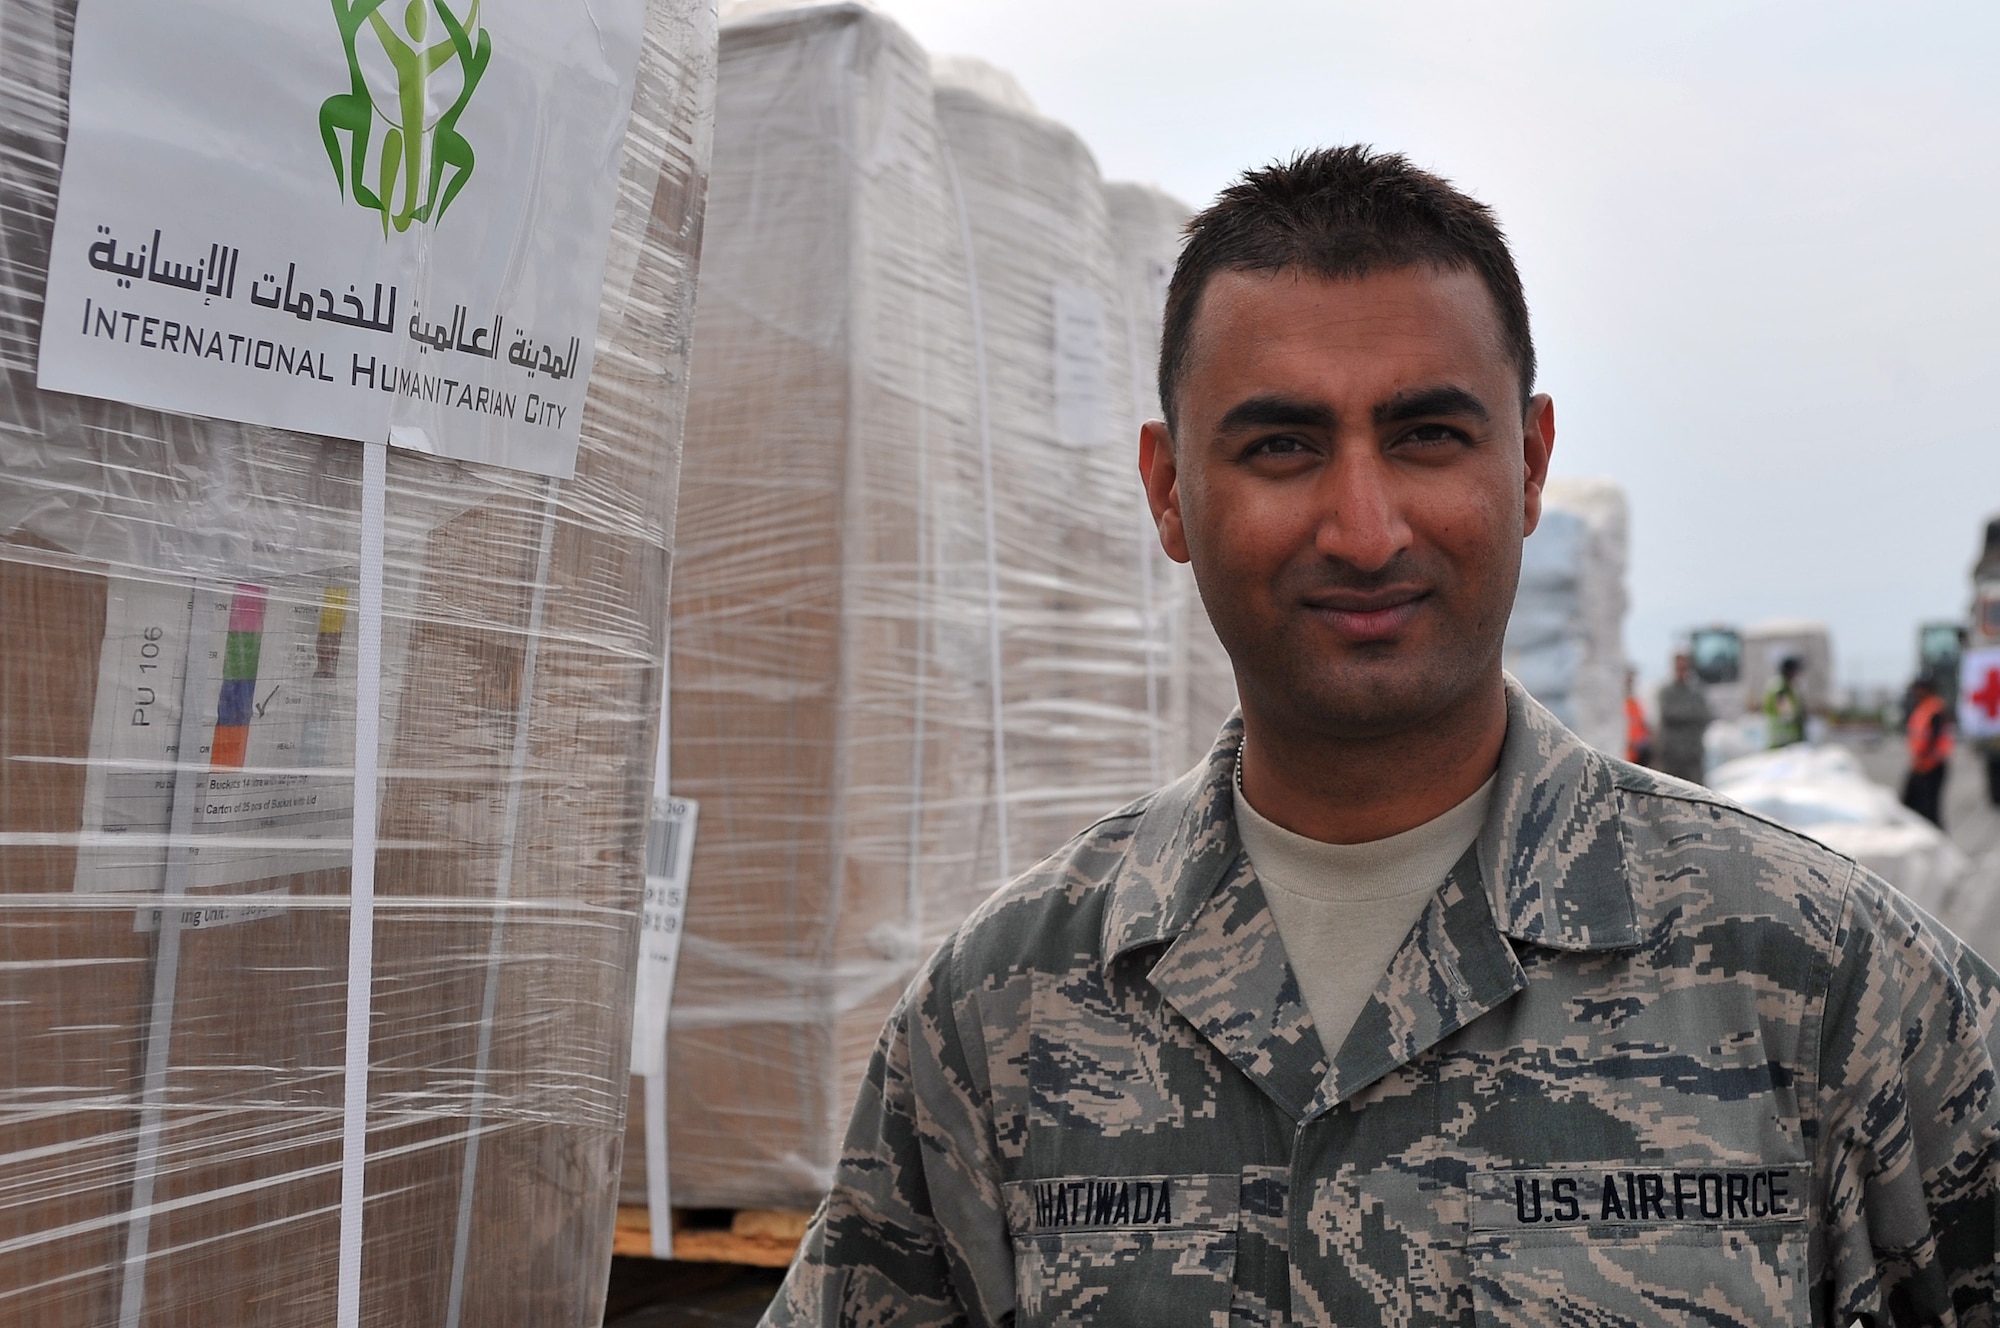 U.S. Air Force Senior Airman Manoj Khatiwada, 21st Medical Operations Squadron aerospace medical technician, stand in front of a pallet of humanitarian assistance and disaster relief supplies, Tribhuvan International Airport in Kathmandu, Nepal, May 8, 2015. Four days after the earthquake in Nepal, Khatiwada was on a C-17 with members of the 36th Contingency Response Group on their way to Nepal. He recently finished a master's degree in Cyber Security and hopes to cross train into Cyber Defense Operations. (U.S. Air Force photo by Staff Sgt. Melissa White/Released)